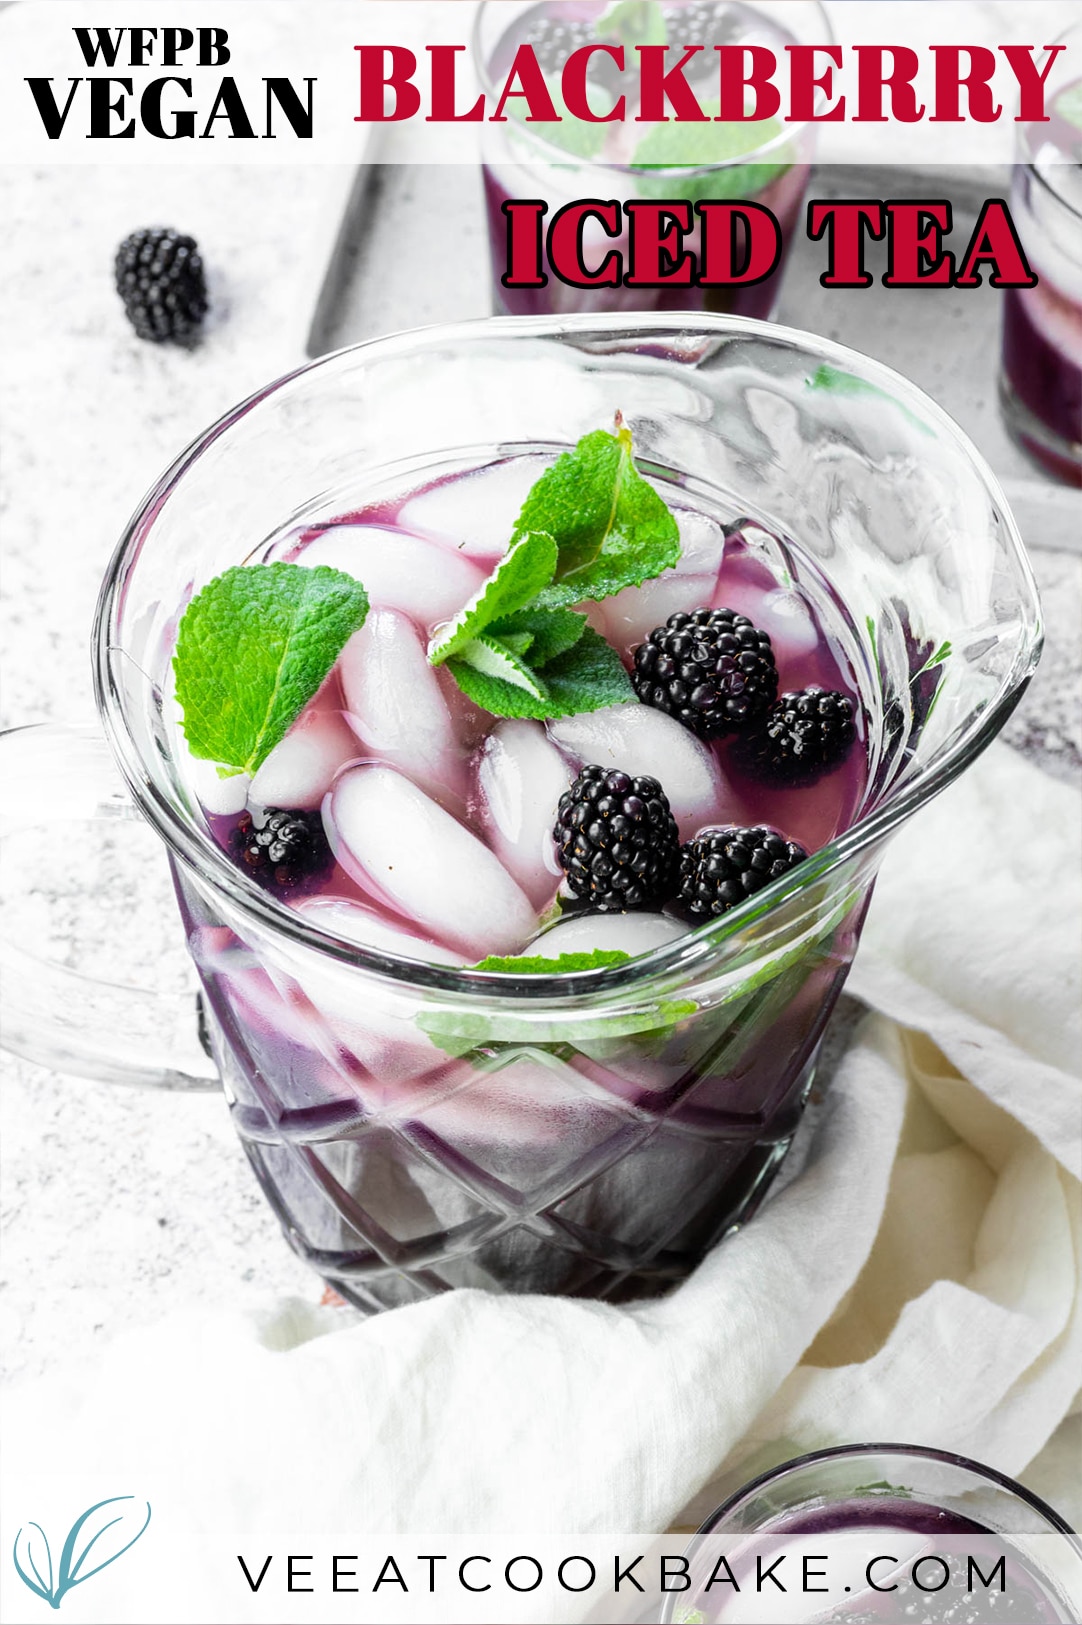 Blackberry Iced tea Picher with text overlay.